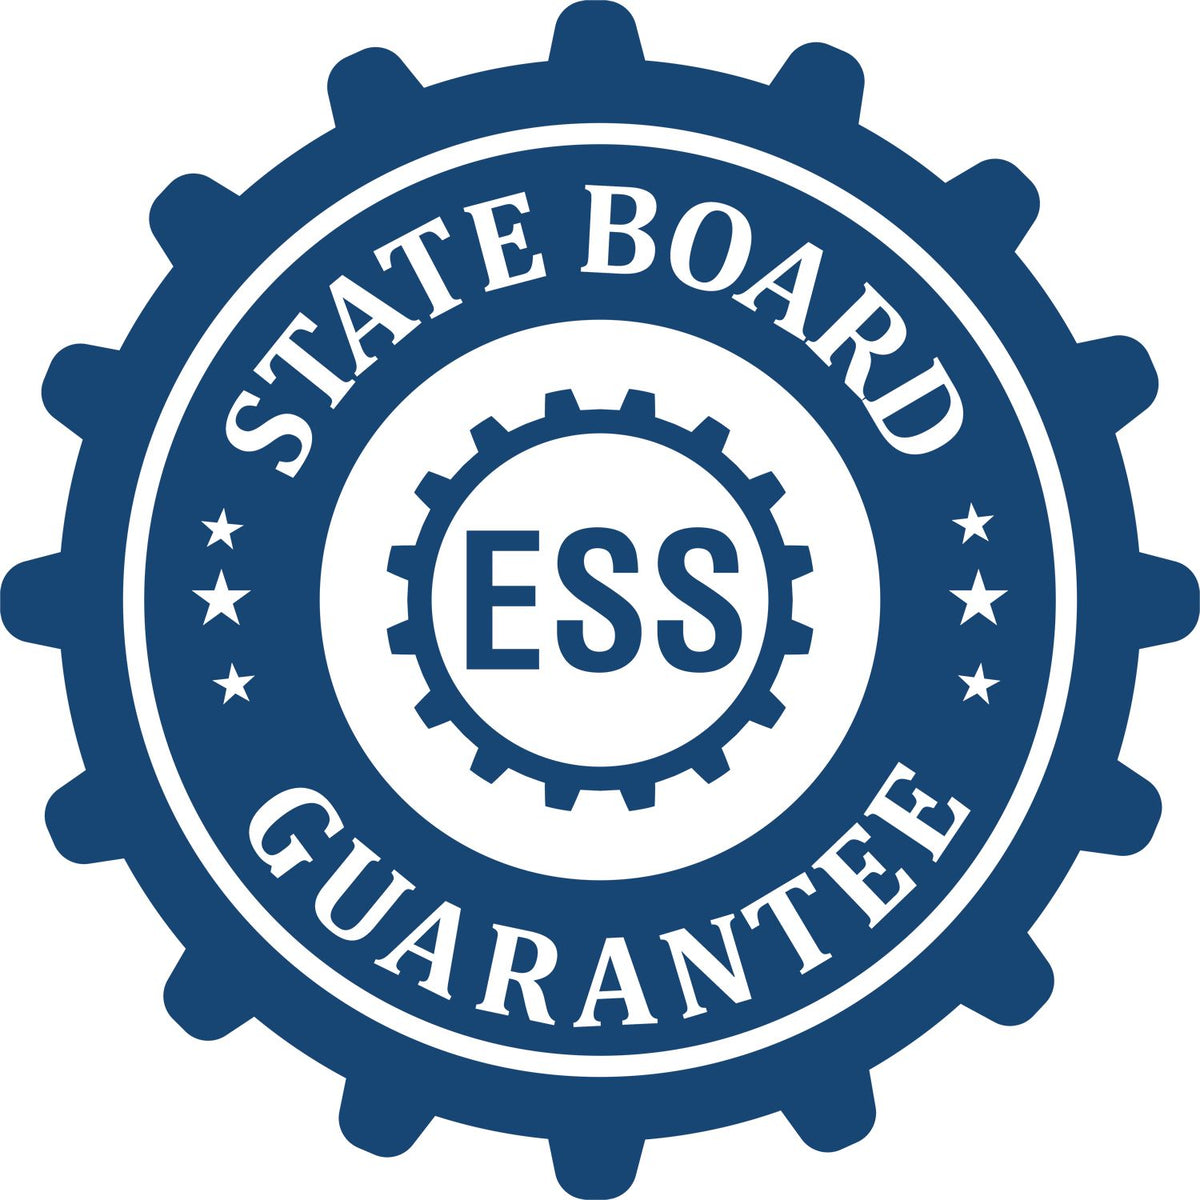 An emblem in a gear shape illustrating a state board guarantee for the Hybrid Arkansas Landscape Architect Seal